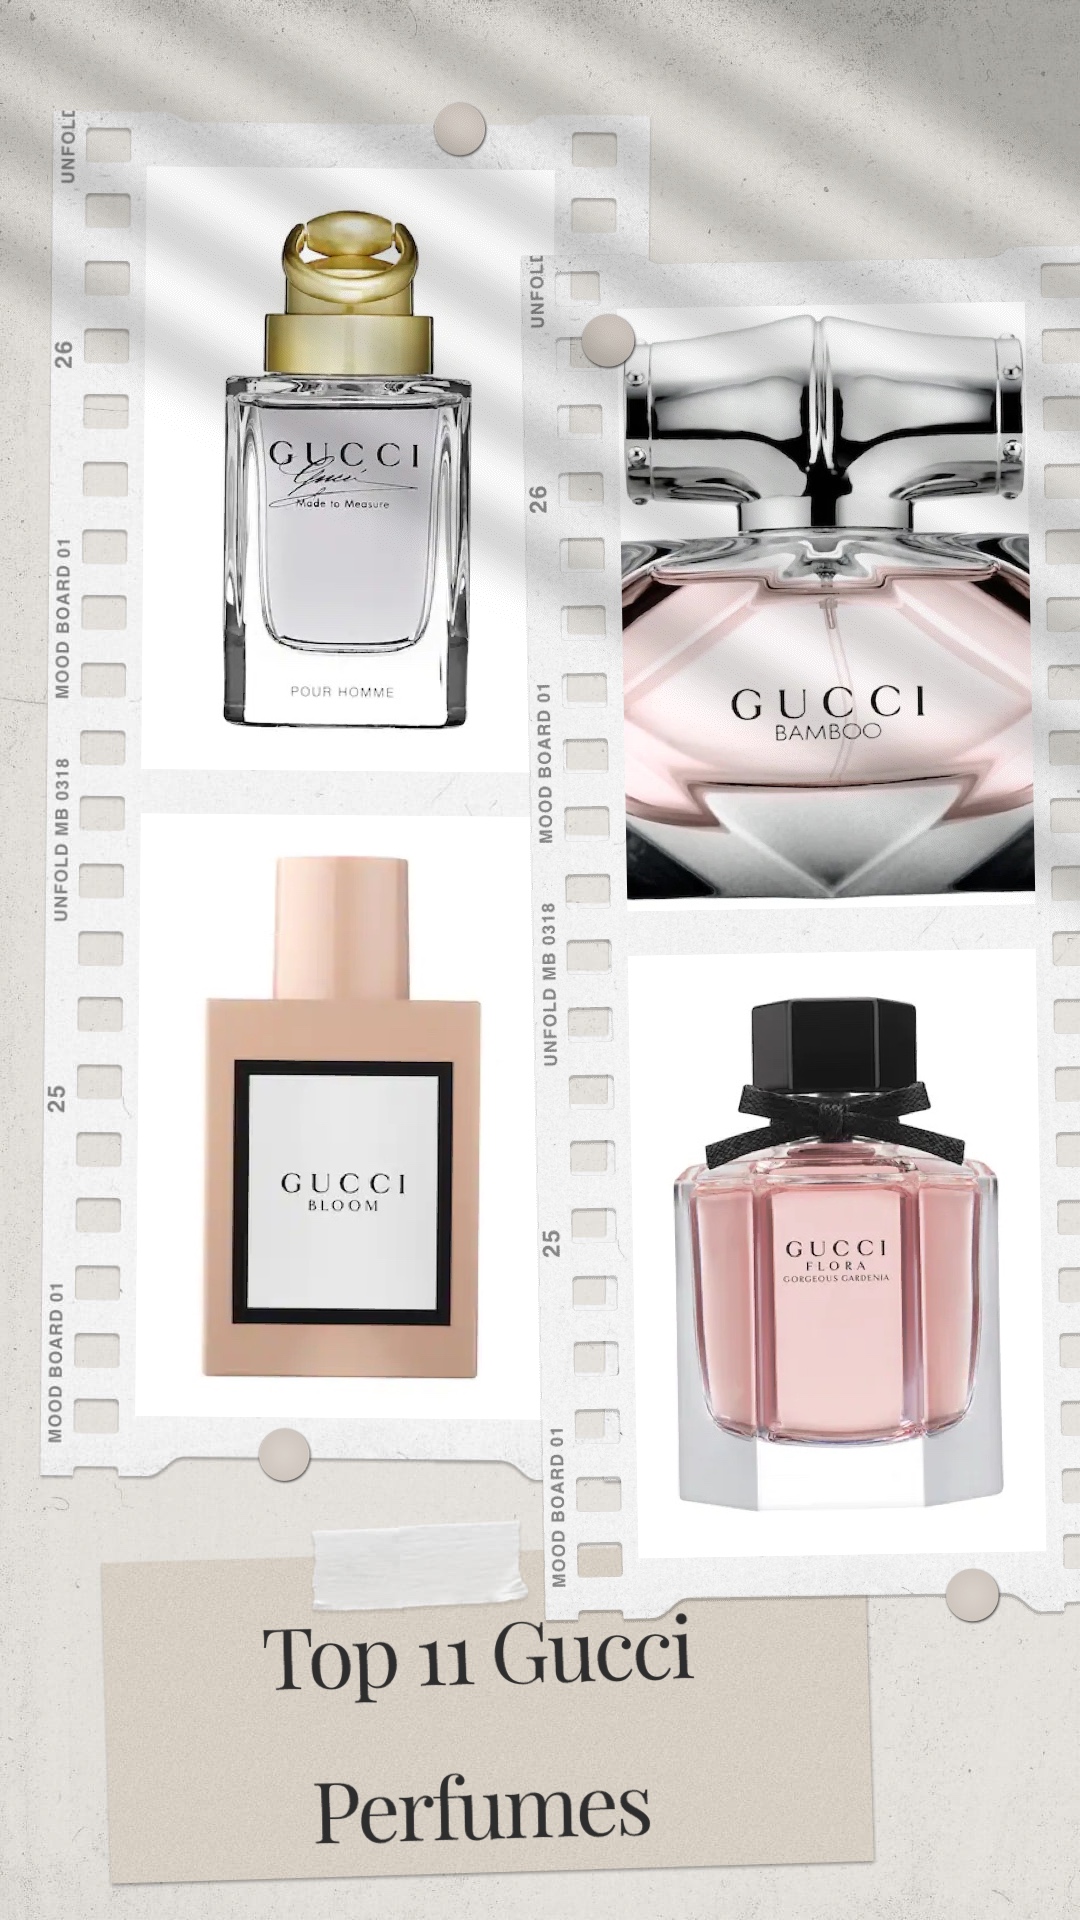 Gucci perfumes for women